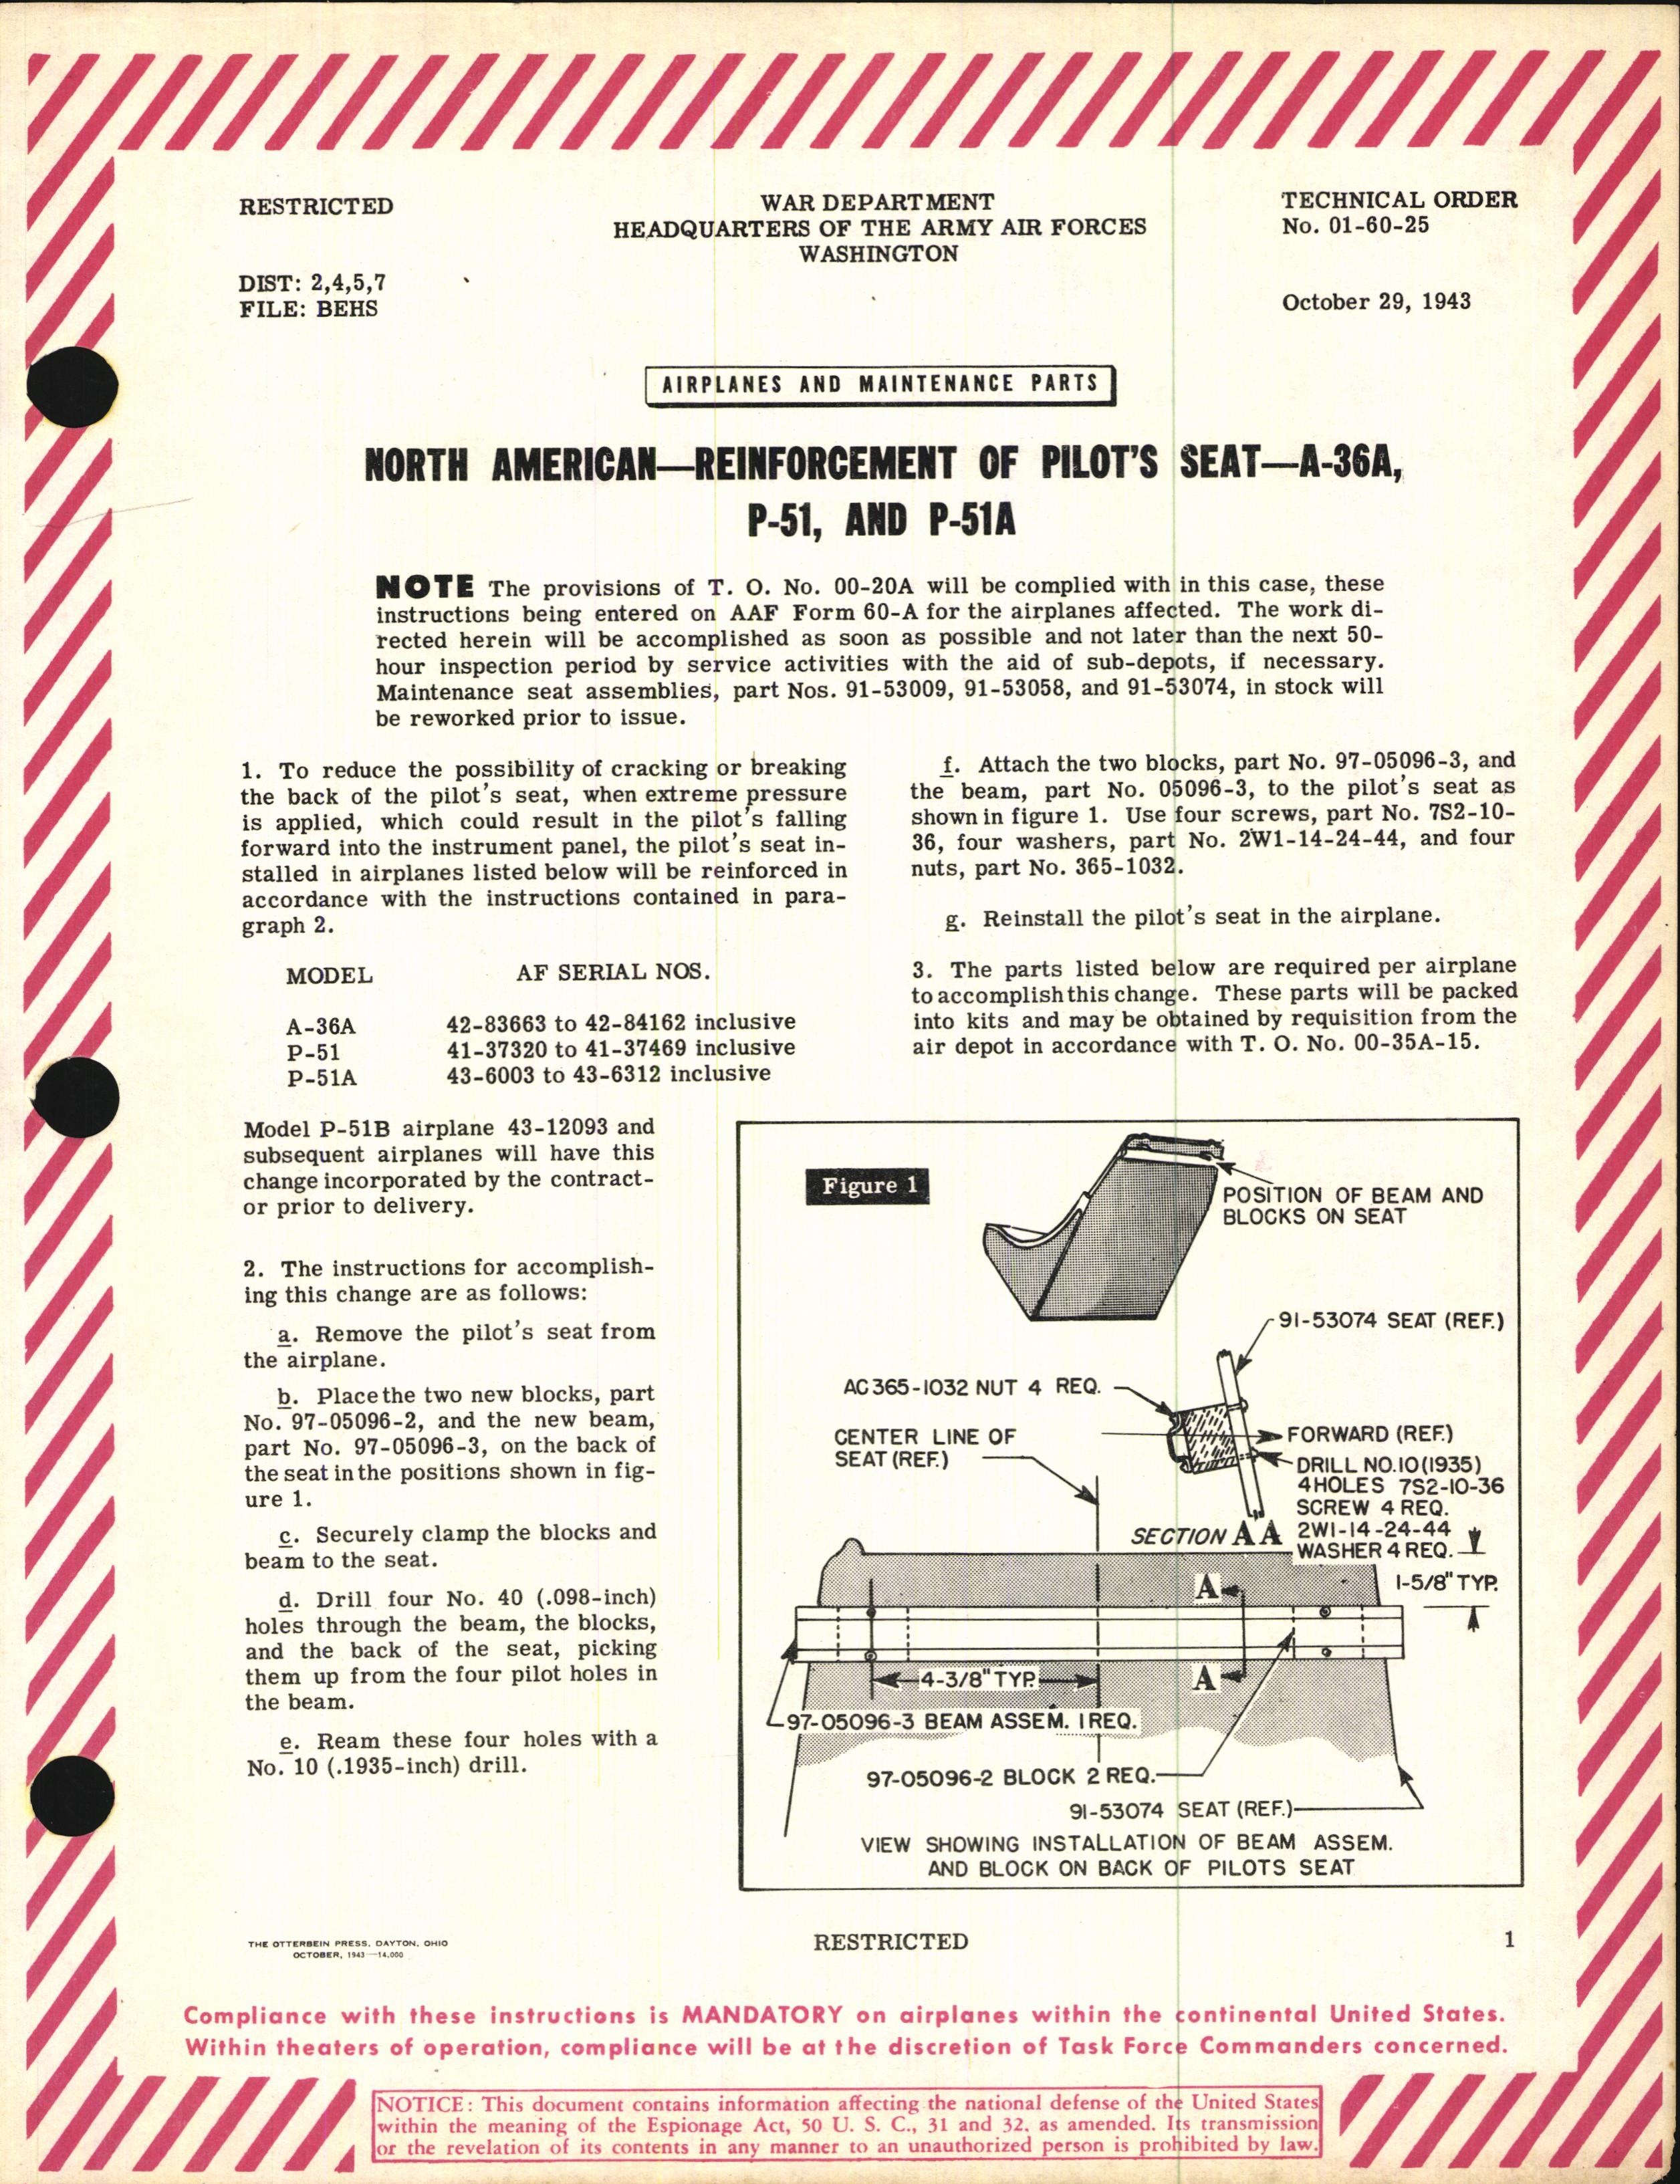 Sample page 1 from AirCorps Library document: Reinforcement of Pilot's Seat for A-36S, P-51, and P-51A